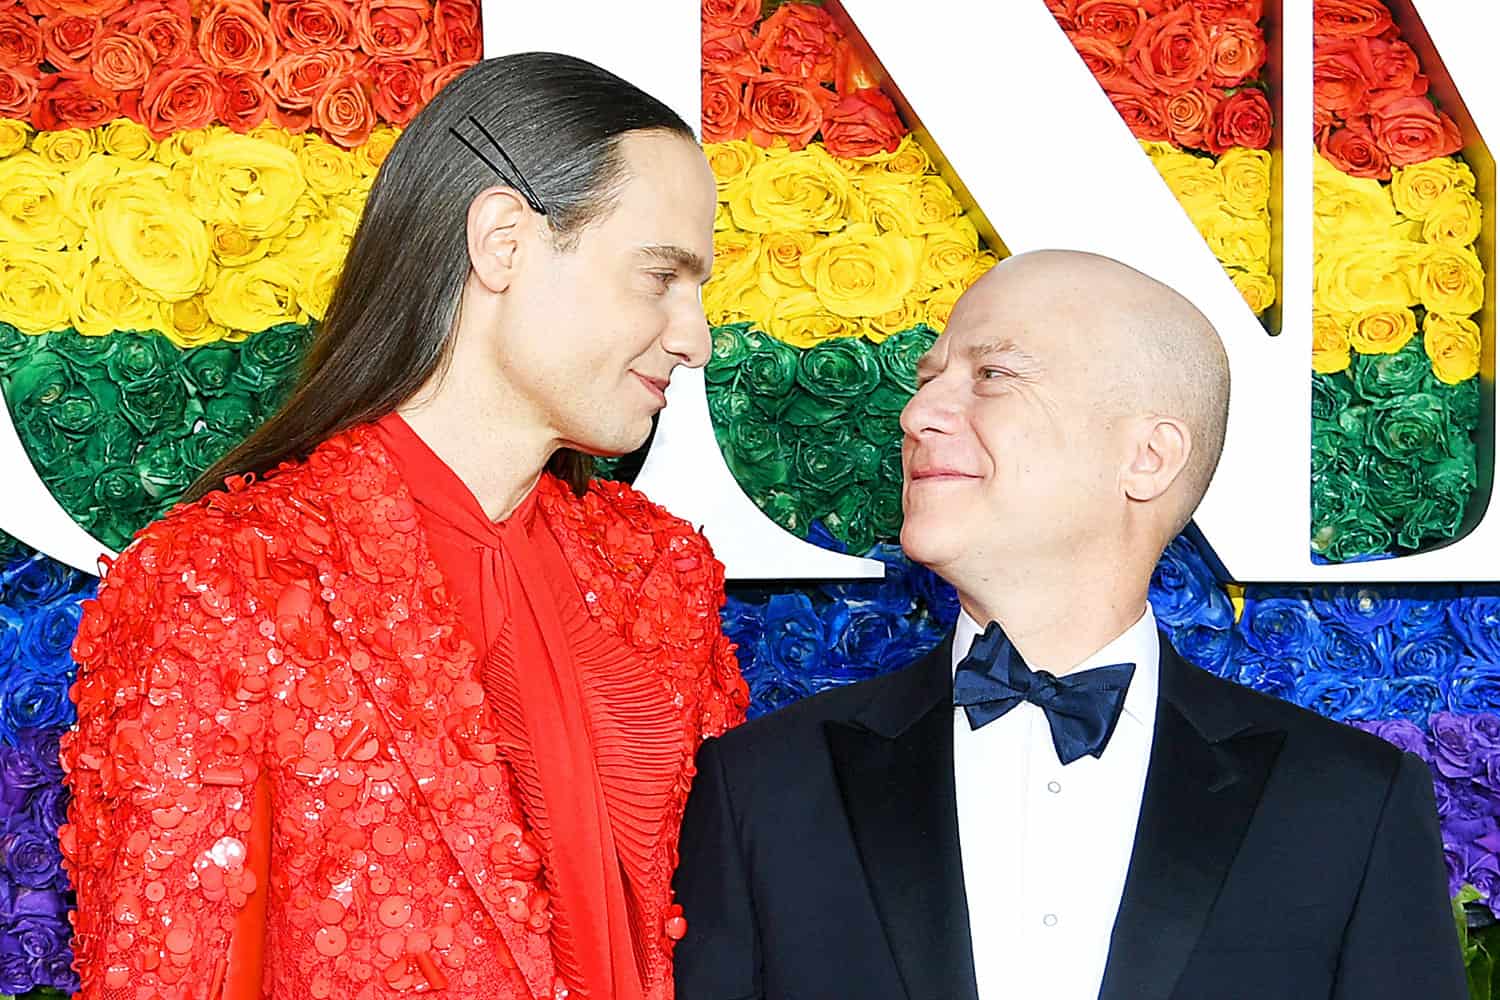 Jordan Roth and Richie Jackson Are So Sweet, It Will Make You Cry